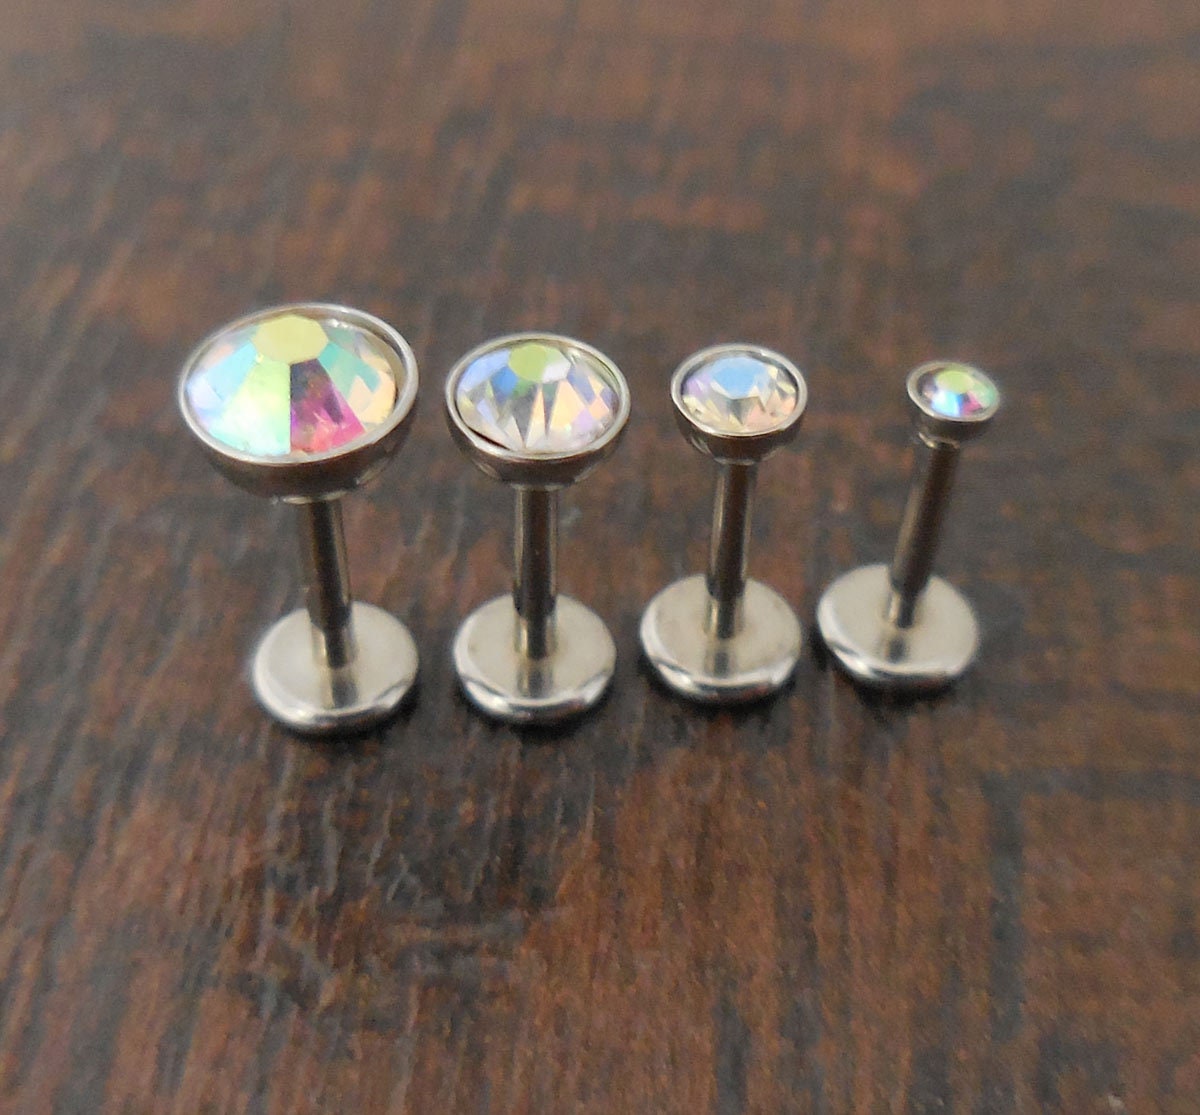 16g 2, 3, 4 or 5mm AB Aurora Borealis 6mm or 8mm Thread less Push Pin Triple Forward Helix Earring Cartilage Labret Stainless Nose Ring